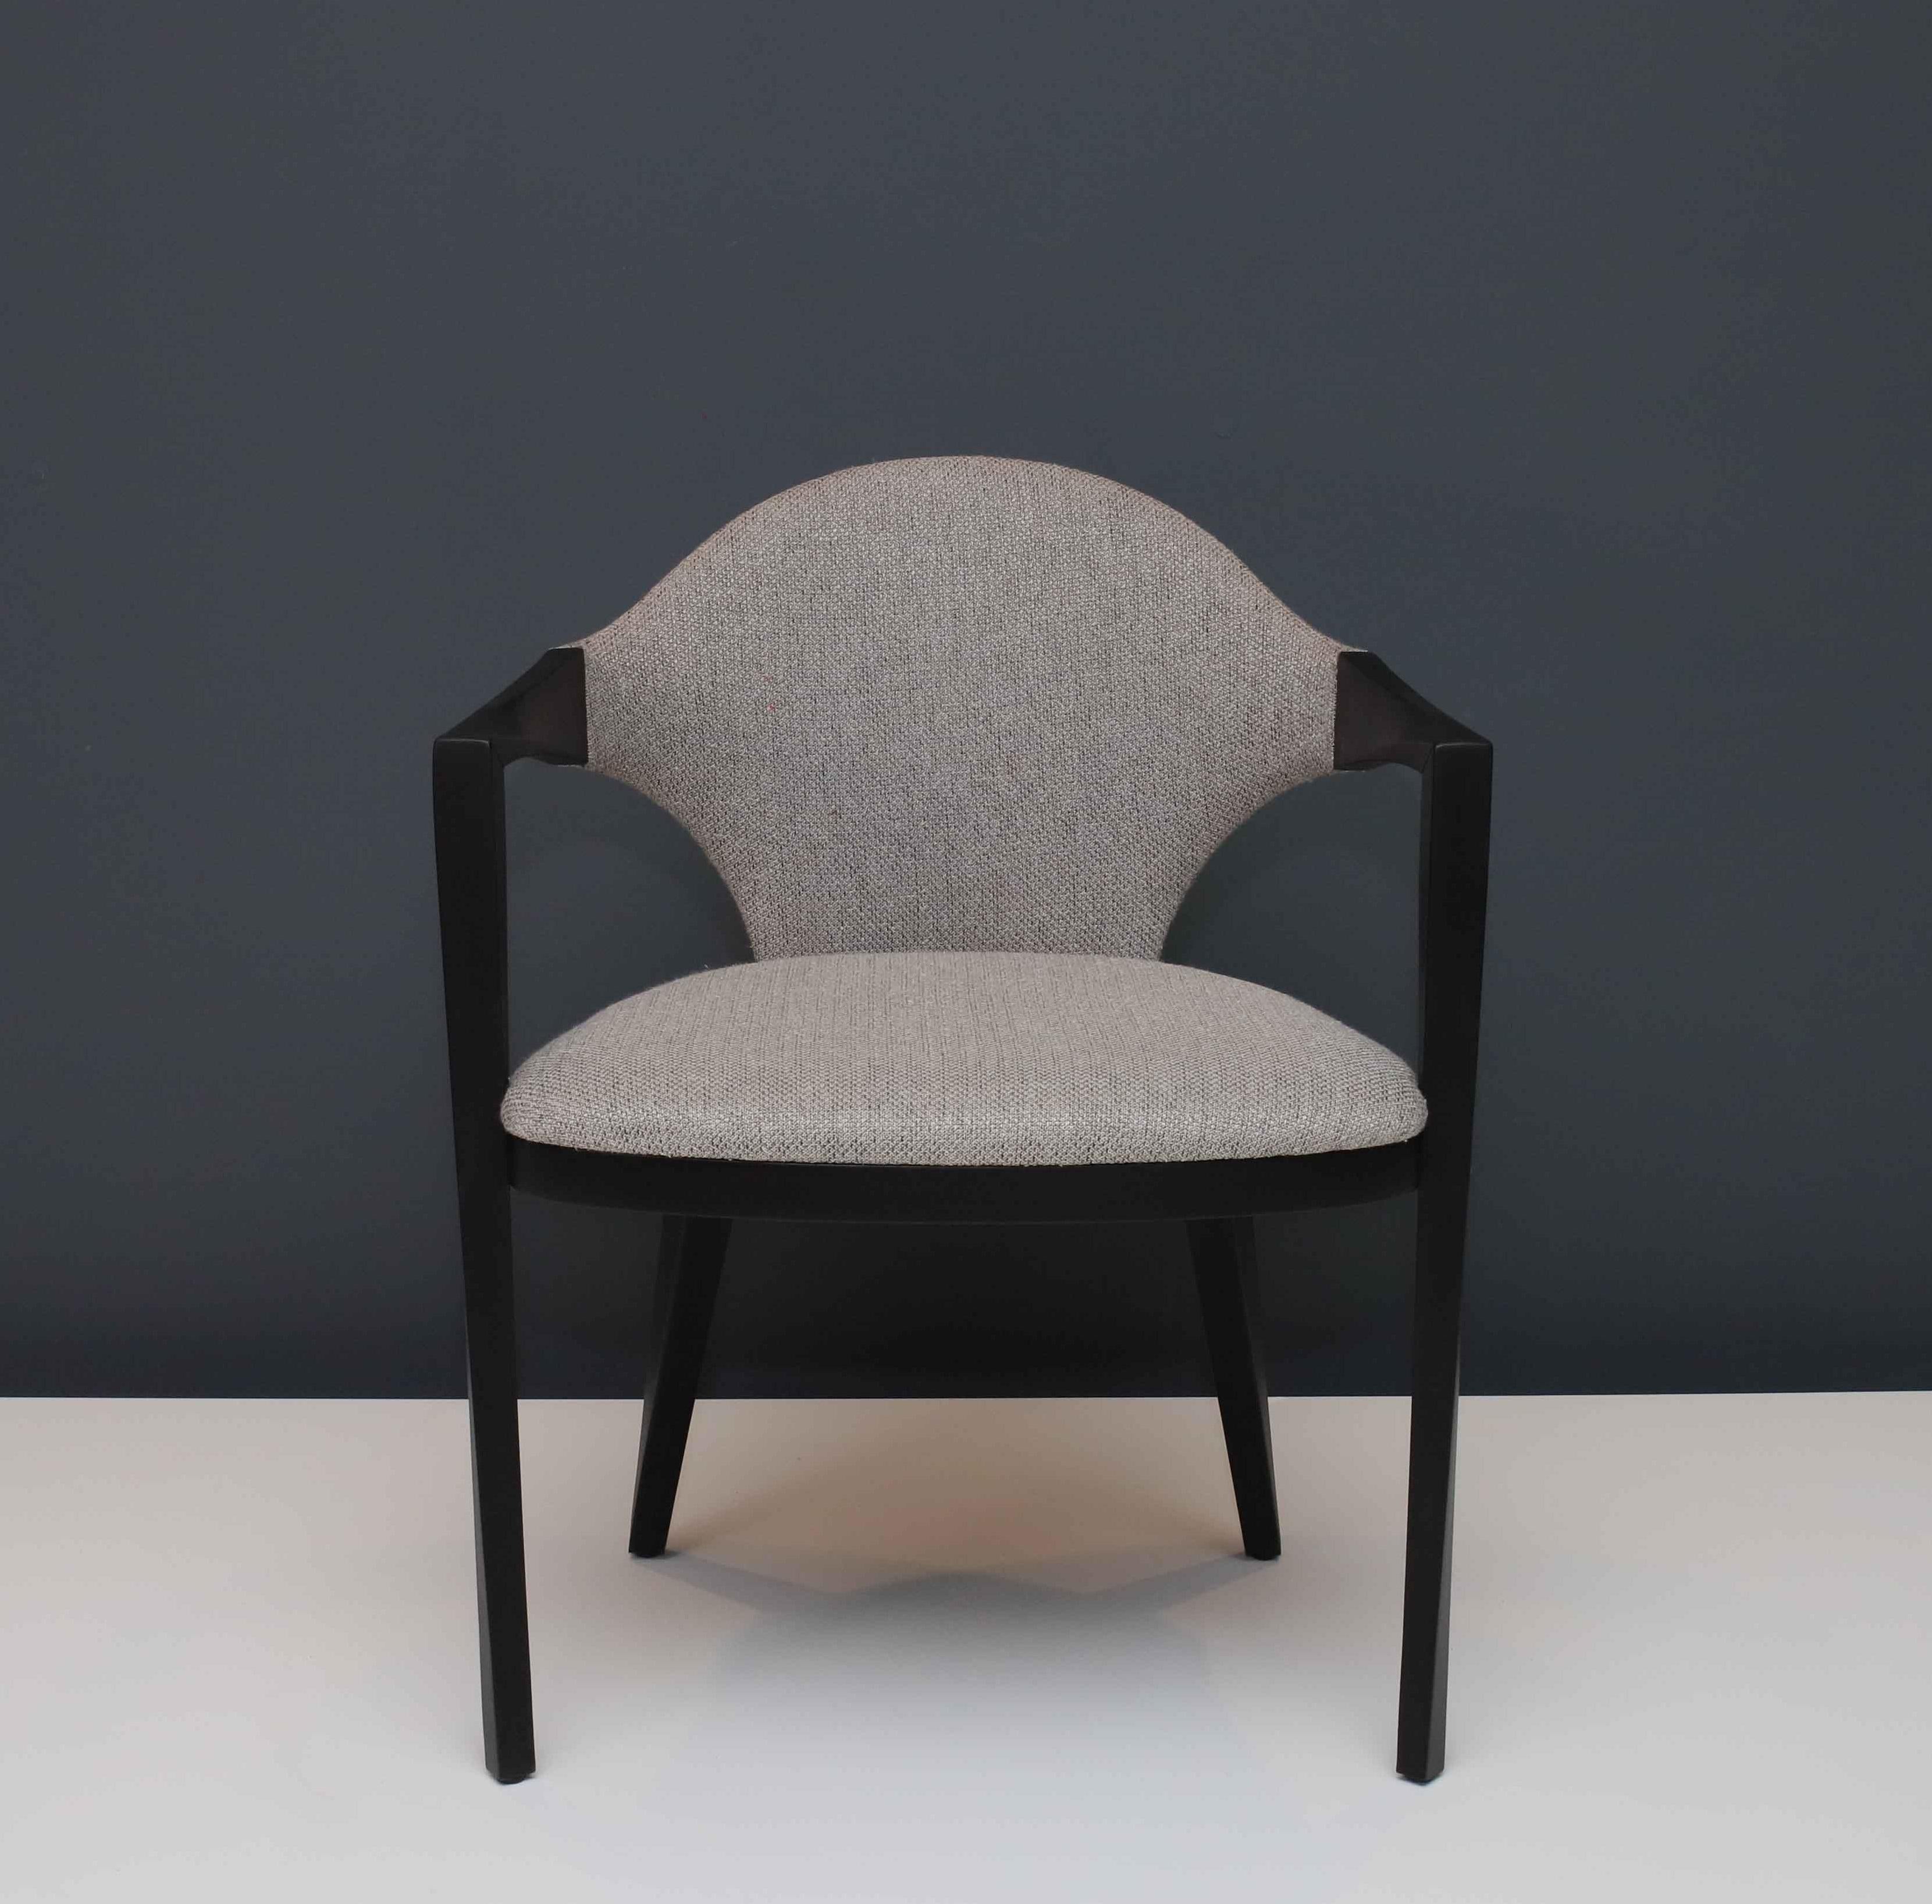 One of the project assumptions for this chair was the intense formal dialogue between different materials like wood and fabric. The designers came to a trace that fluidly and continuously interconnects these two materials.

A piece with strong